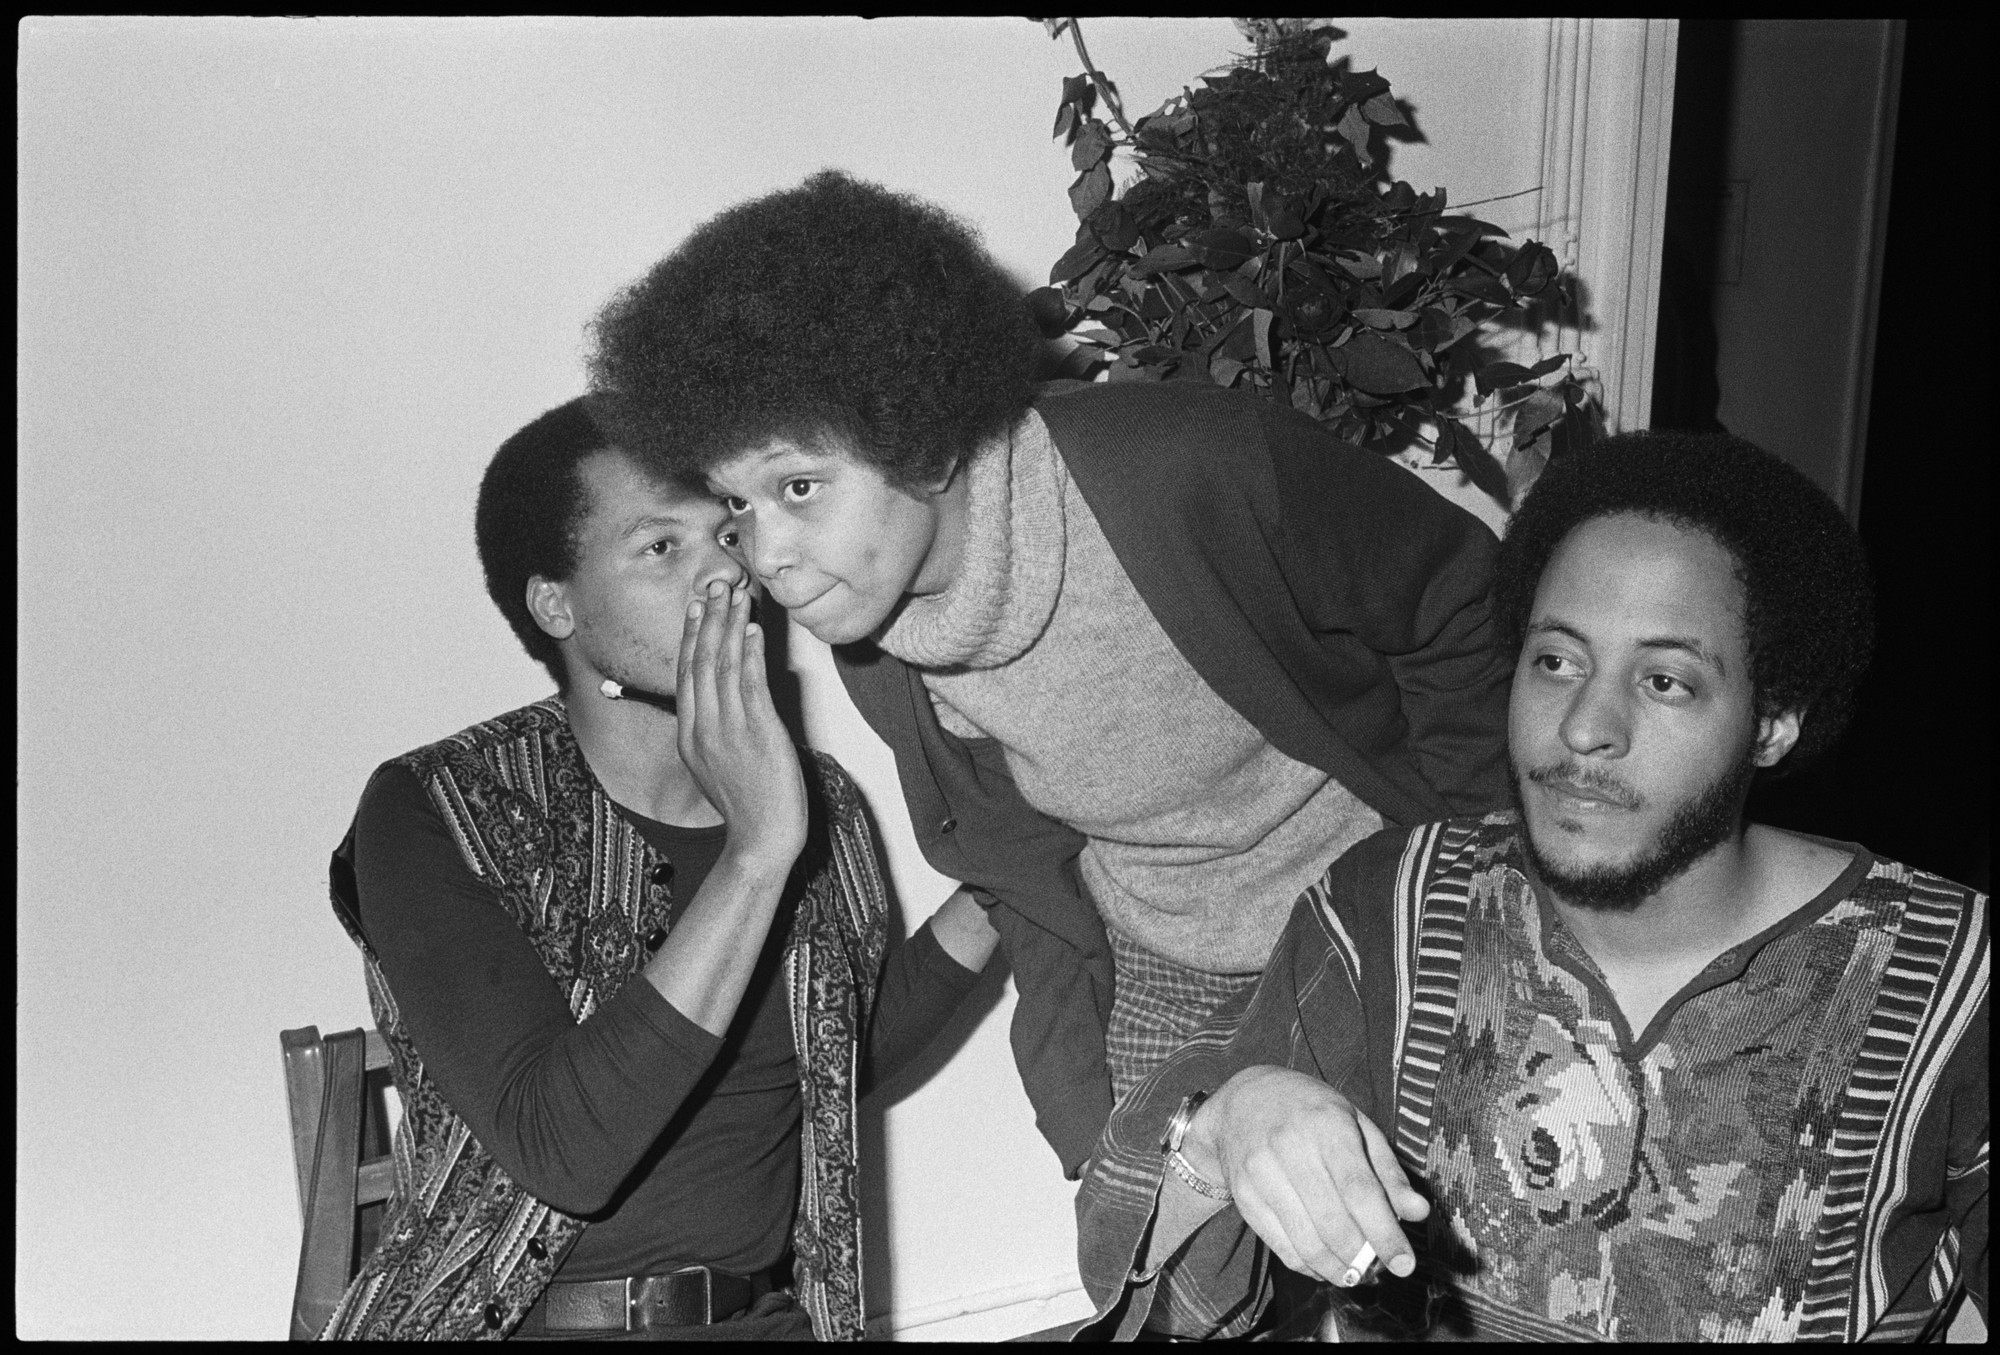 Photographs of A Book Party for *Contextures*, which took place on the same day as the opening of Houston Conwill’s exhibition *Notes of a Griot*. March 18, 1978